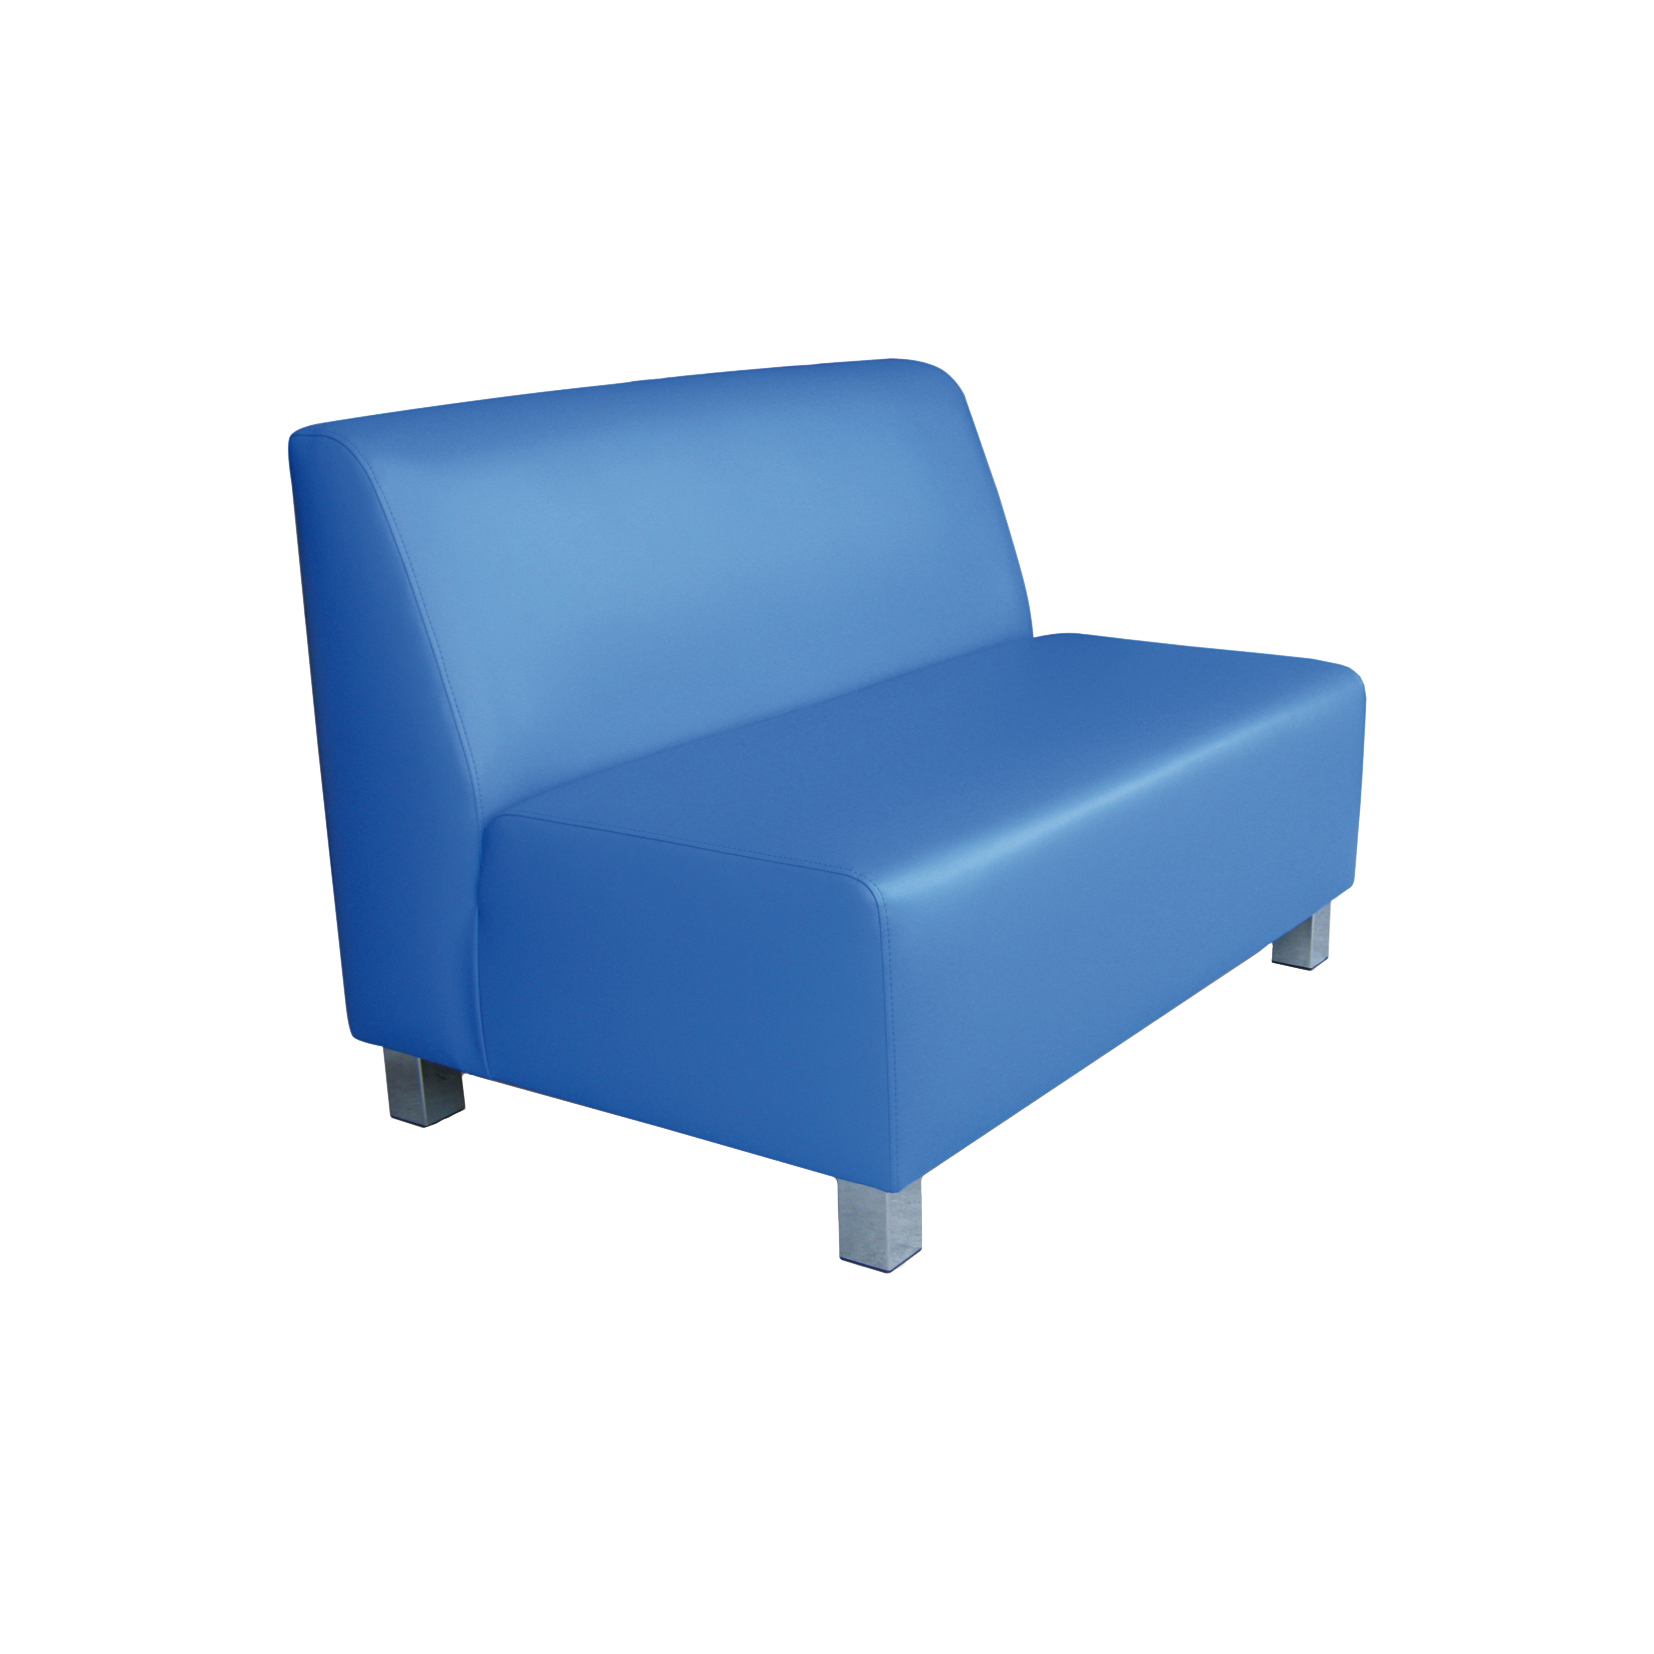 Educated furniture apollo couch for staffroom and visitor areas